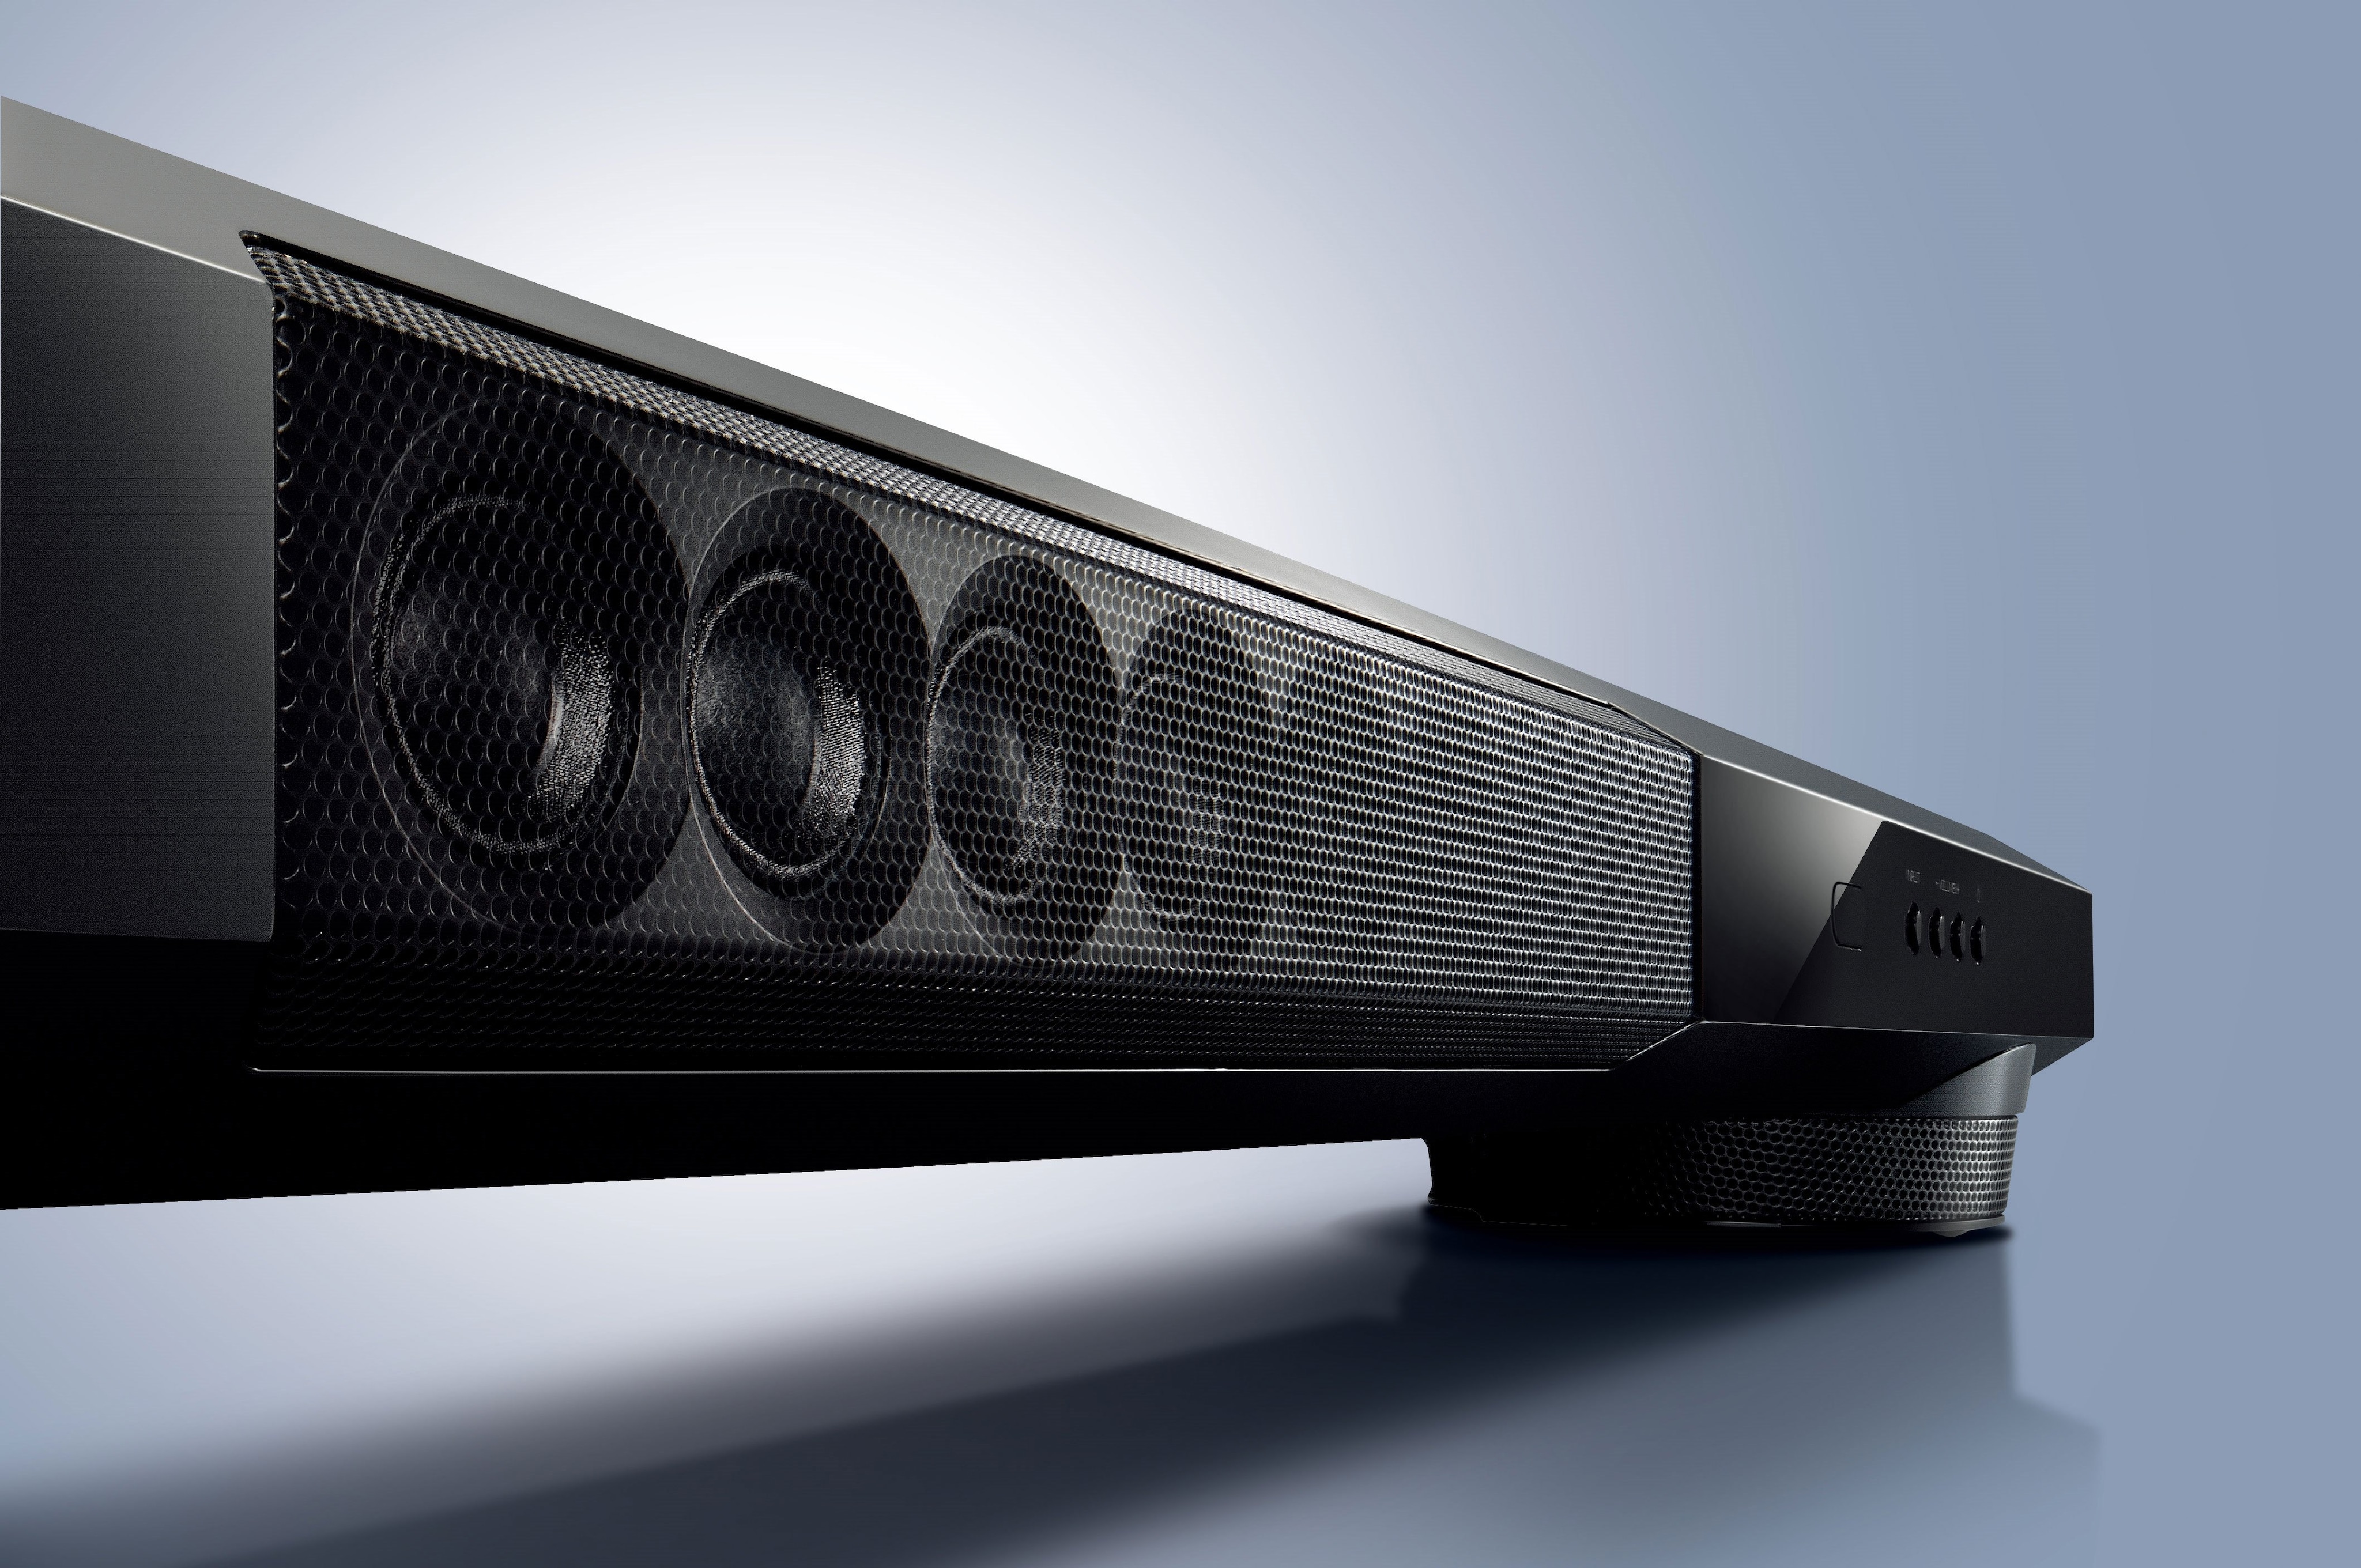 YSP-1400 - Overview - Sound Bars - Audio & Visual - Products